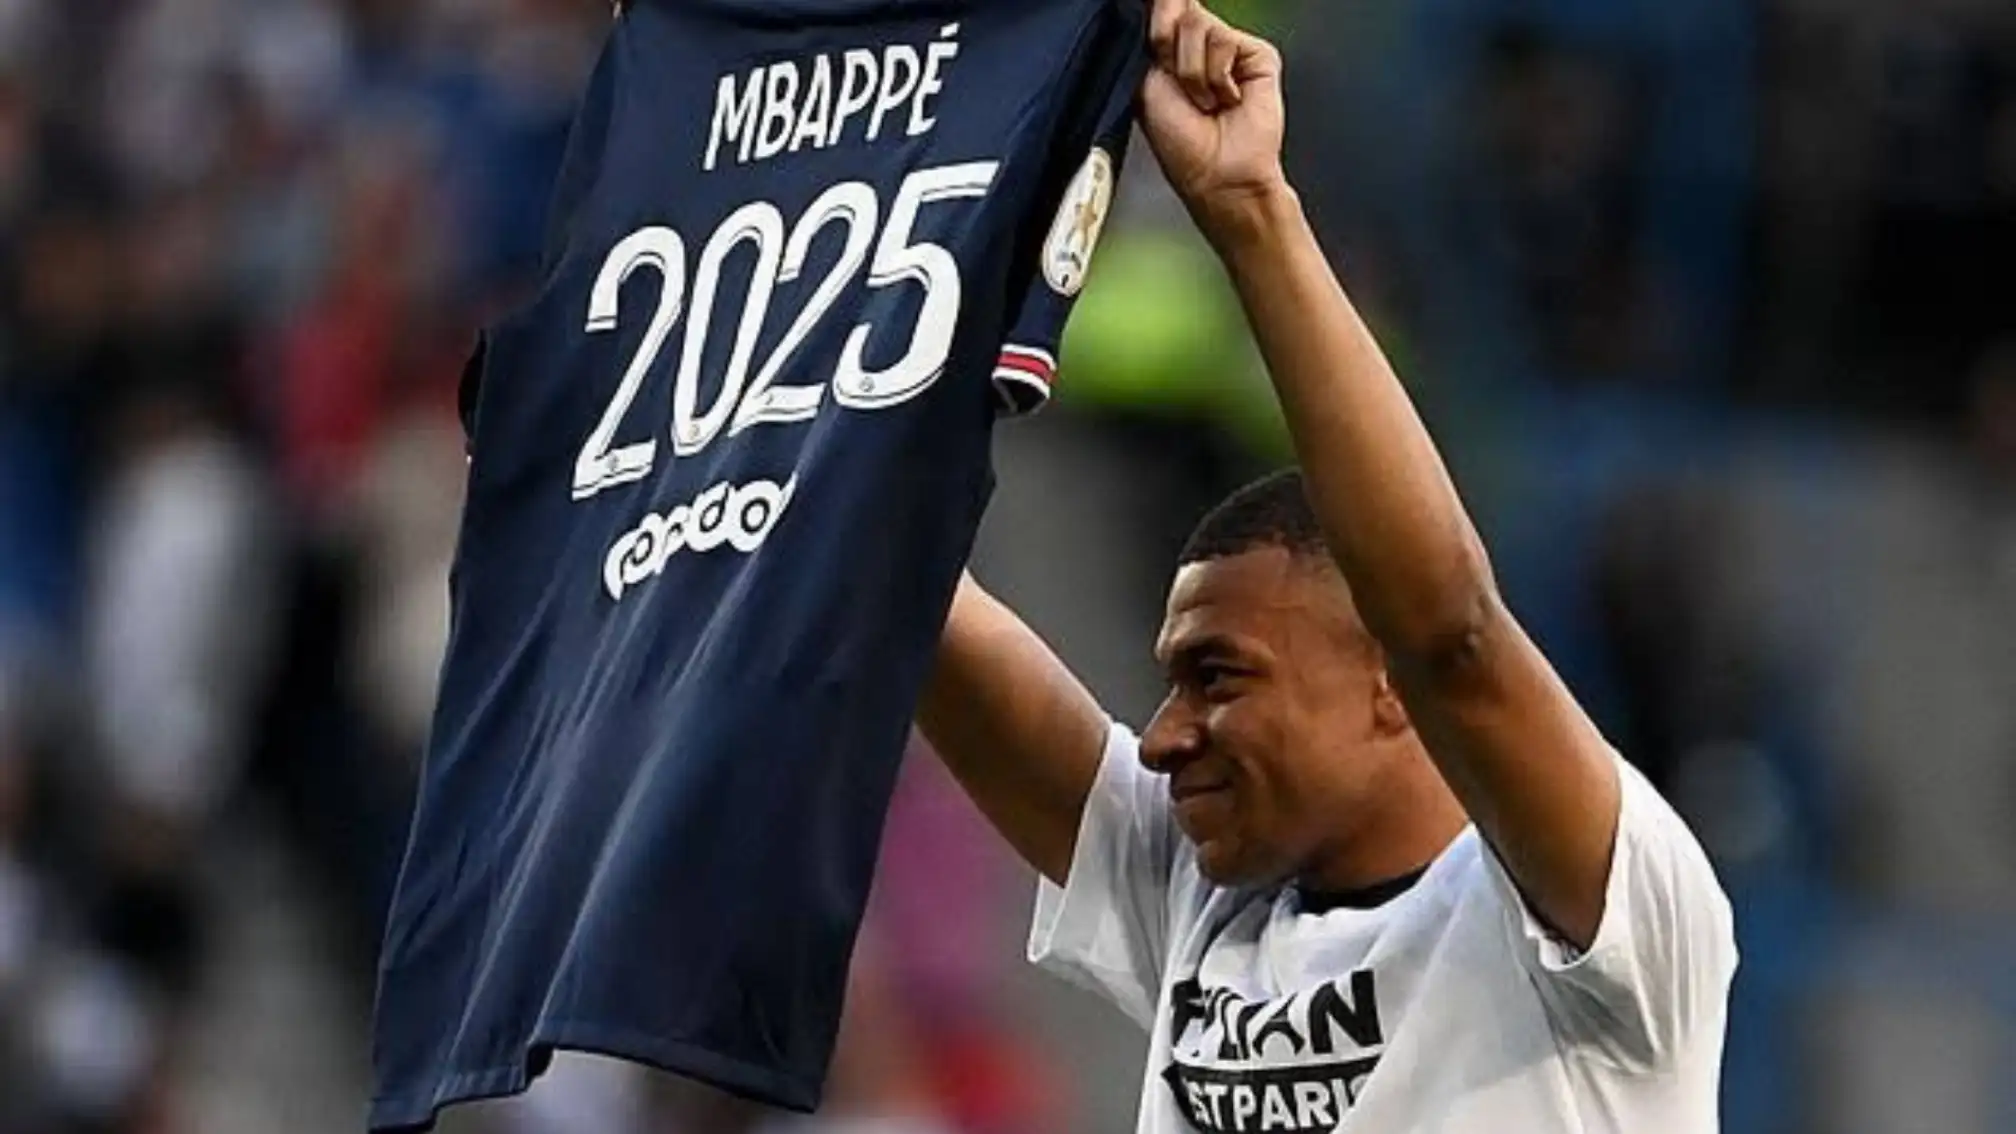 UEFA president Ceferin backs Mbappe deal; notes similarities between Madrid and PSG offers